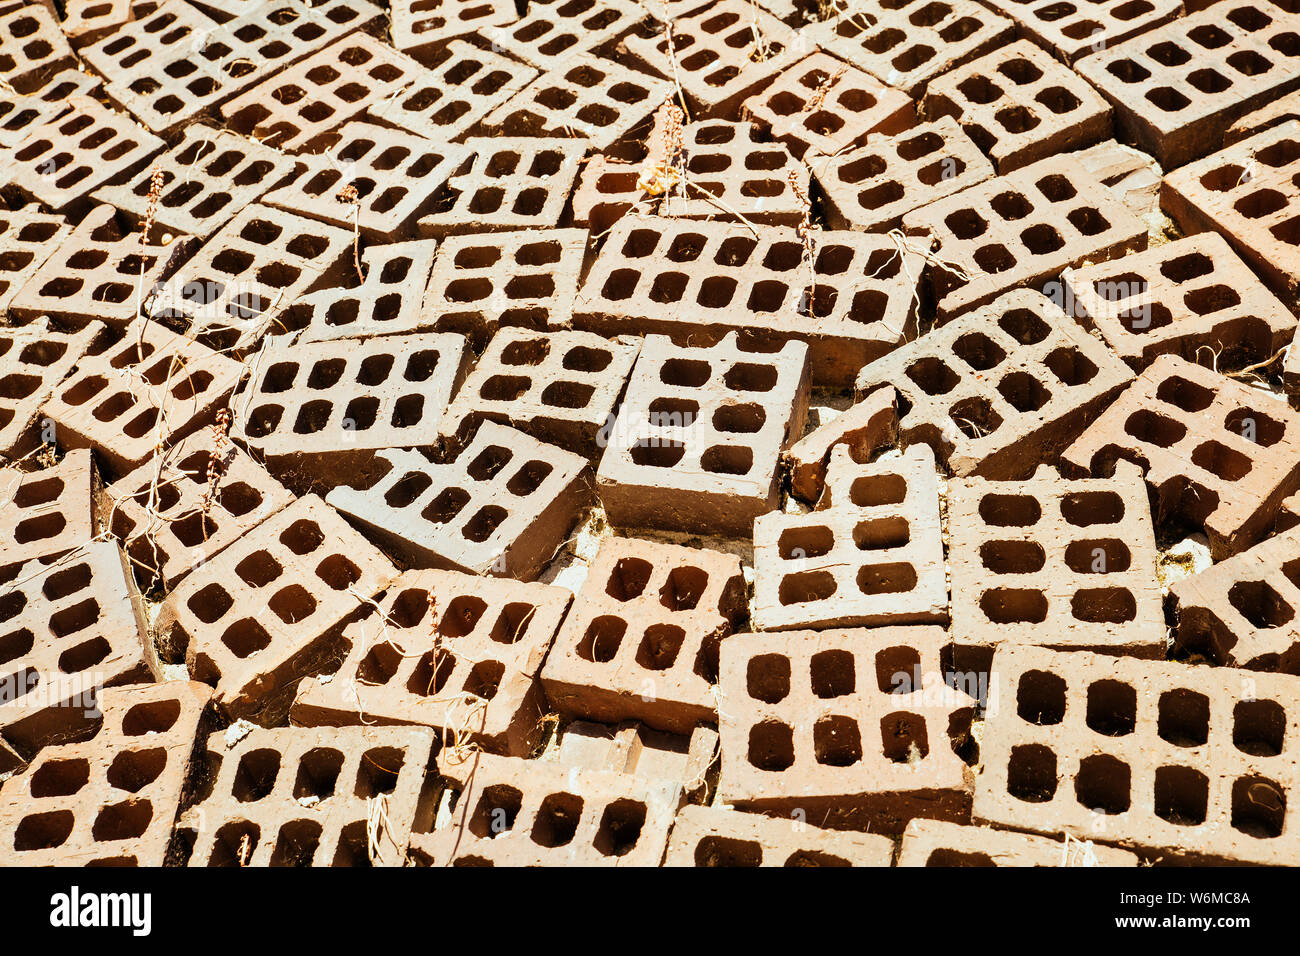 close-up pile of bricks with drilled holes. Materials construction Stock Photo